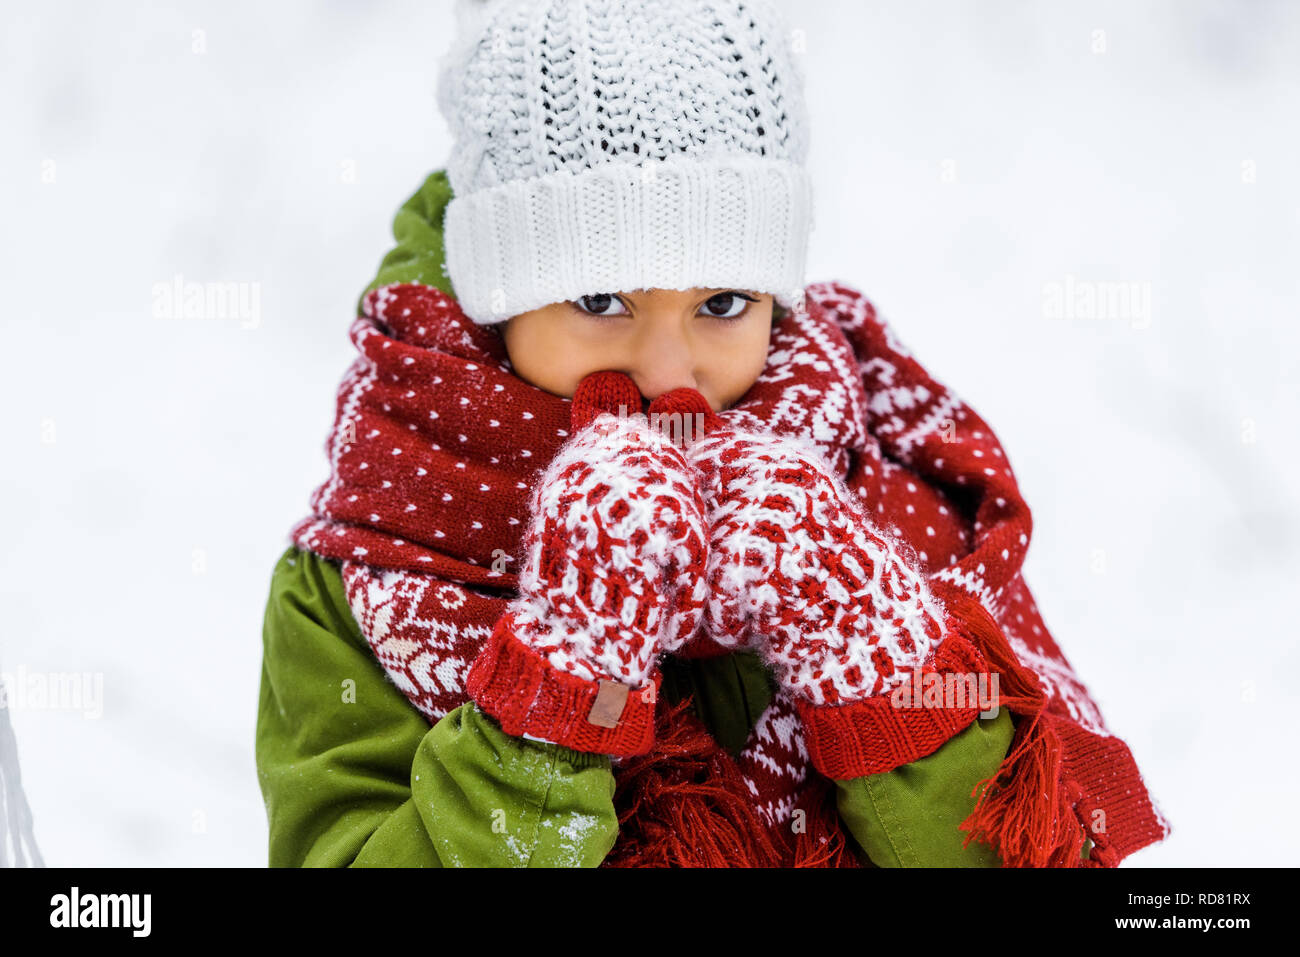 https://c8.alamy.com/comp/RD81RX/cute-african-american-child-in-warm-clothing-at-white-background-RD81RX.jpg